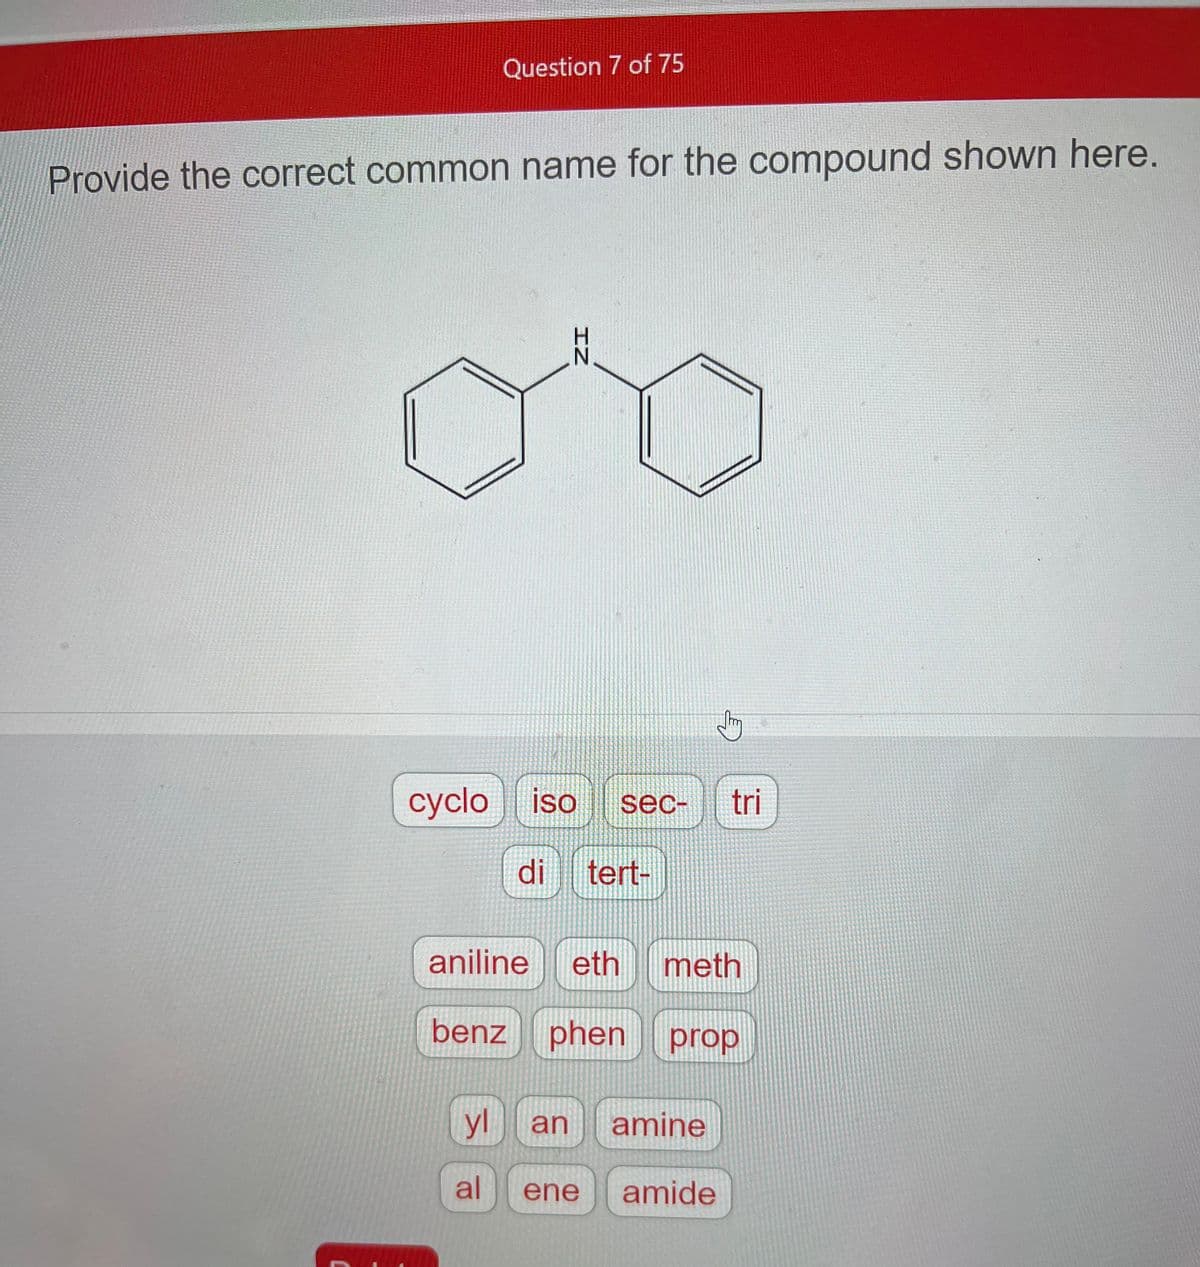 Question 7 of 75
Provide the correct common name for the compound shown here.
IZ
cyclo iso sec-
di tert-
J
tri
aniline eth
benz phen prop
meth
vl an amine
al ene amide